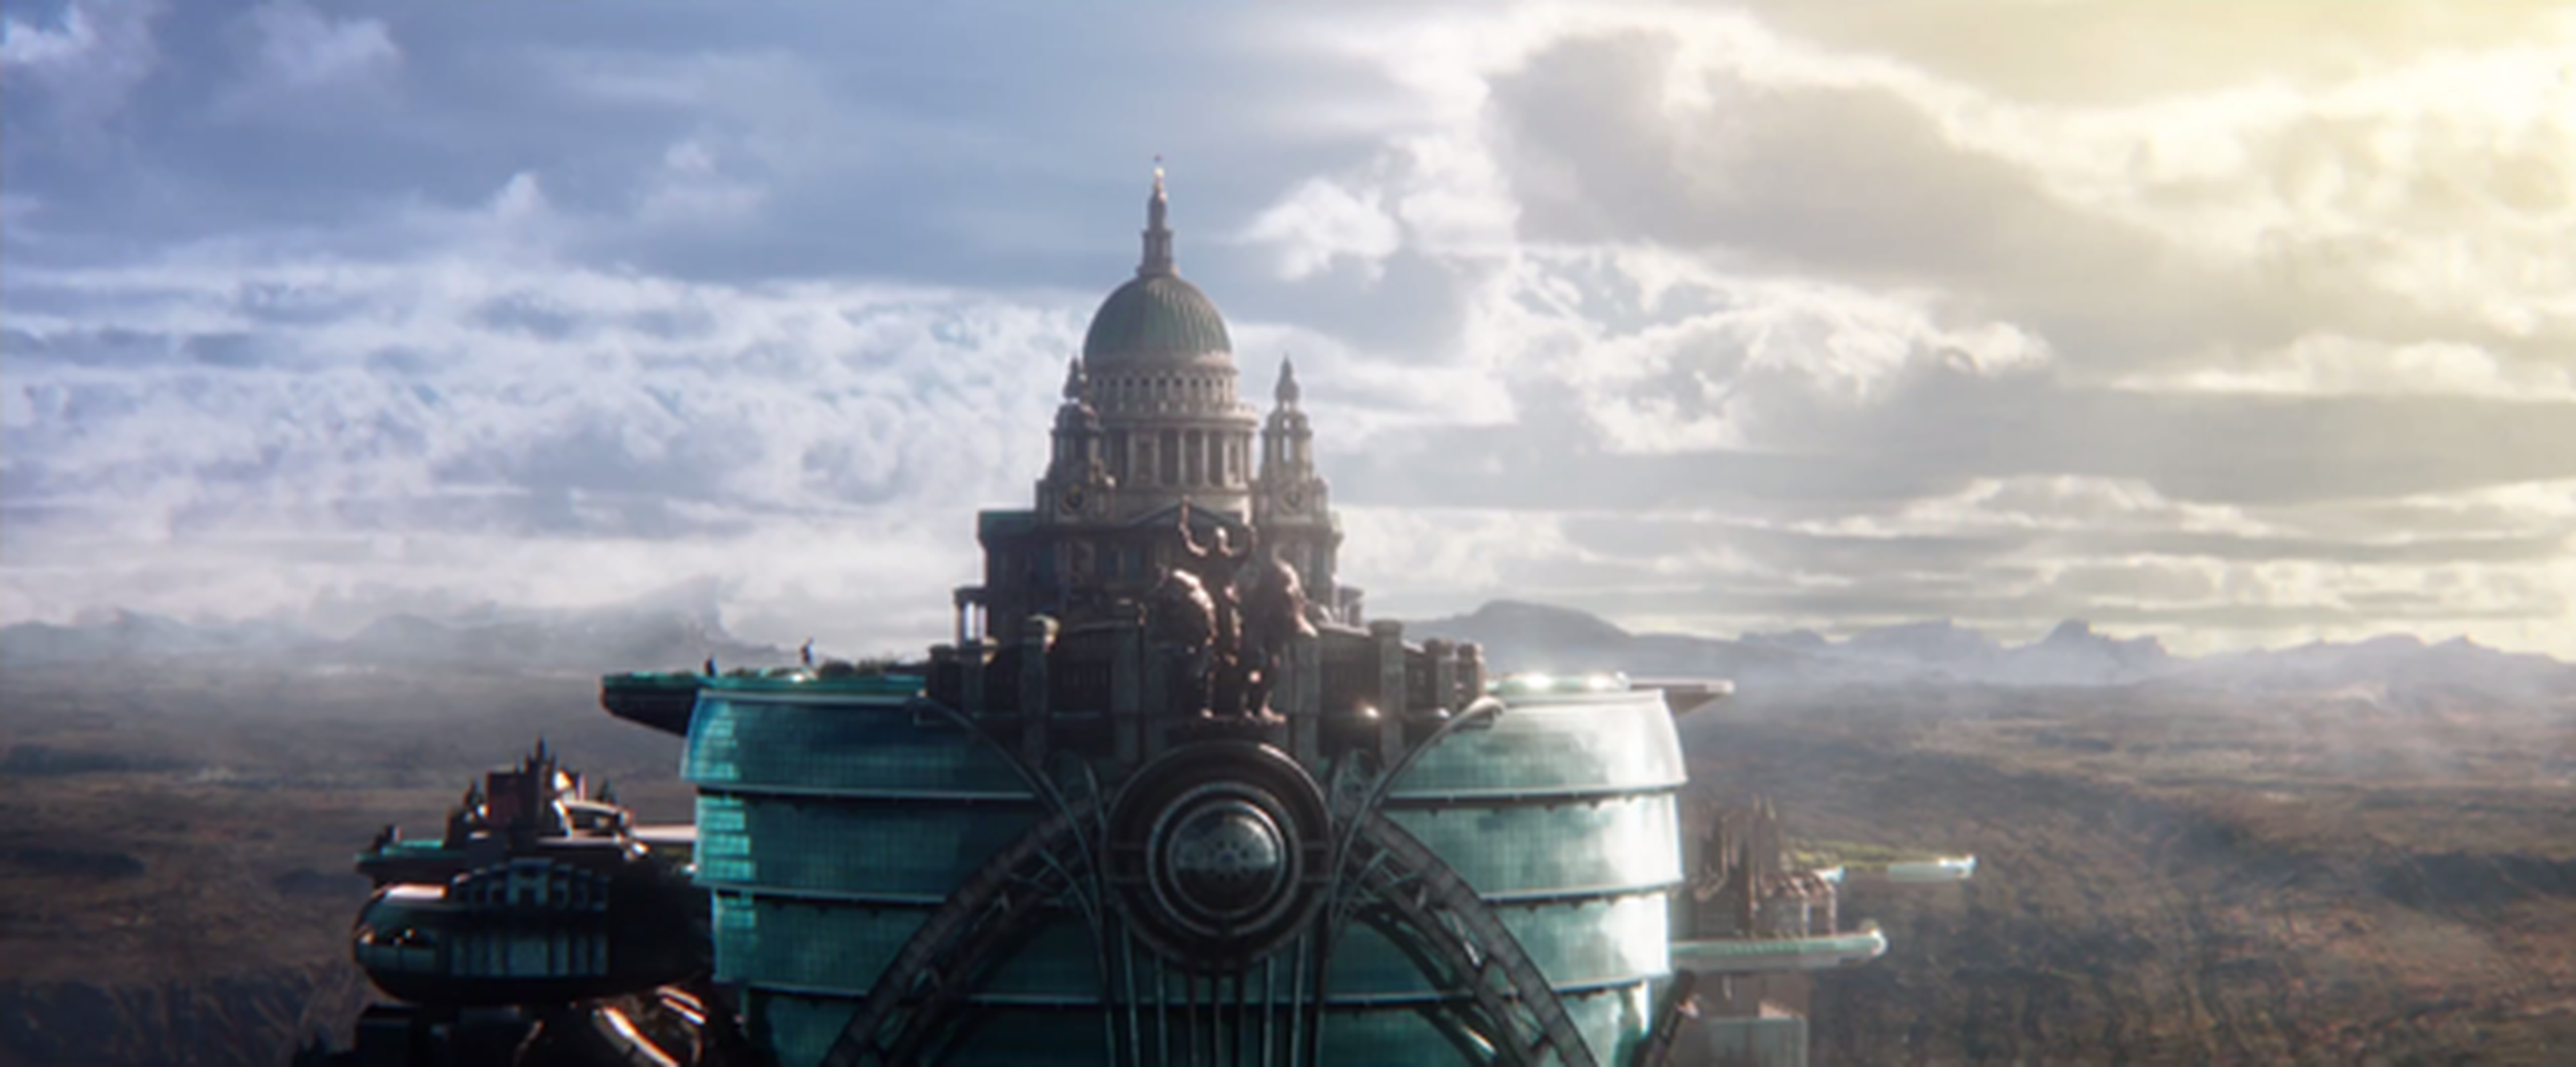 MORTAL ENGINES - Tráiler Mundial (Universal Pictures) - HD